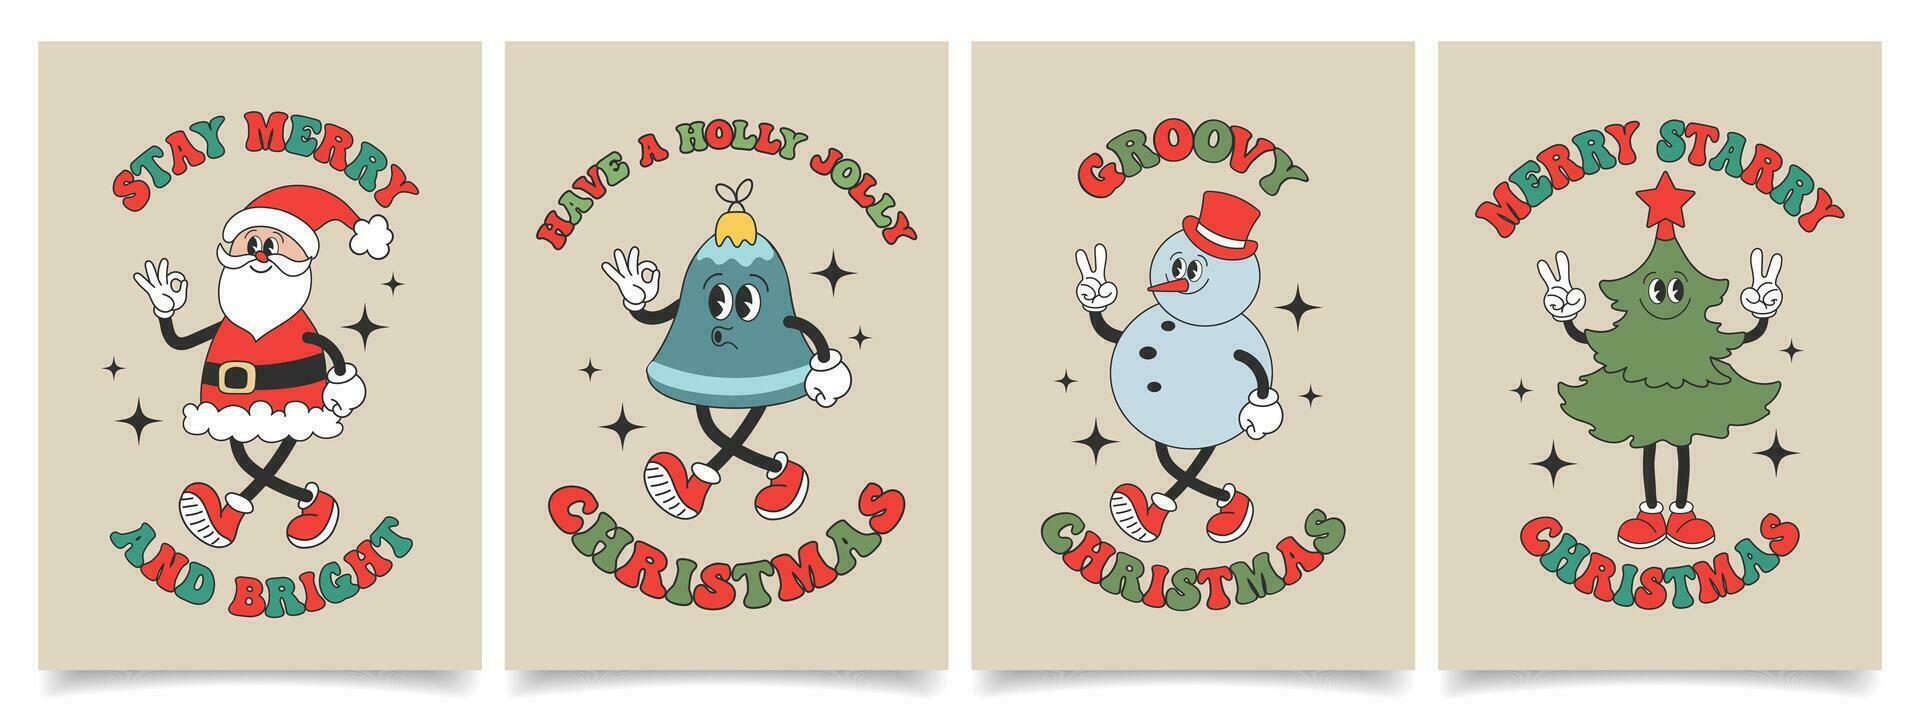 Set of Christmas cards with retro Groovy hippie characters. Snowman, Santa Claus, Christmas tree, jingle bell. Holiday illustrations in trendy cartoon style. Vector